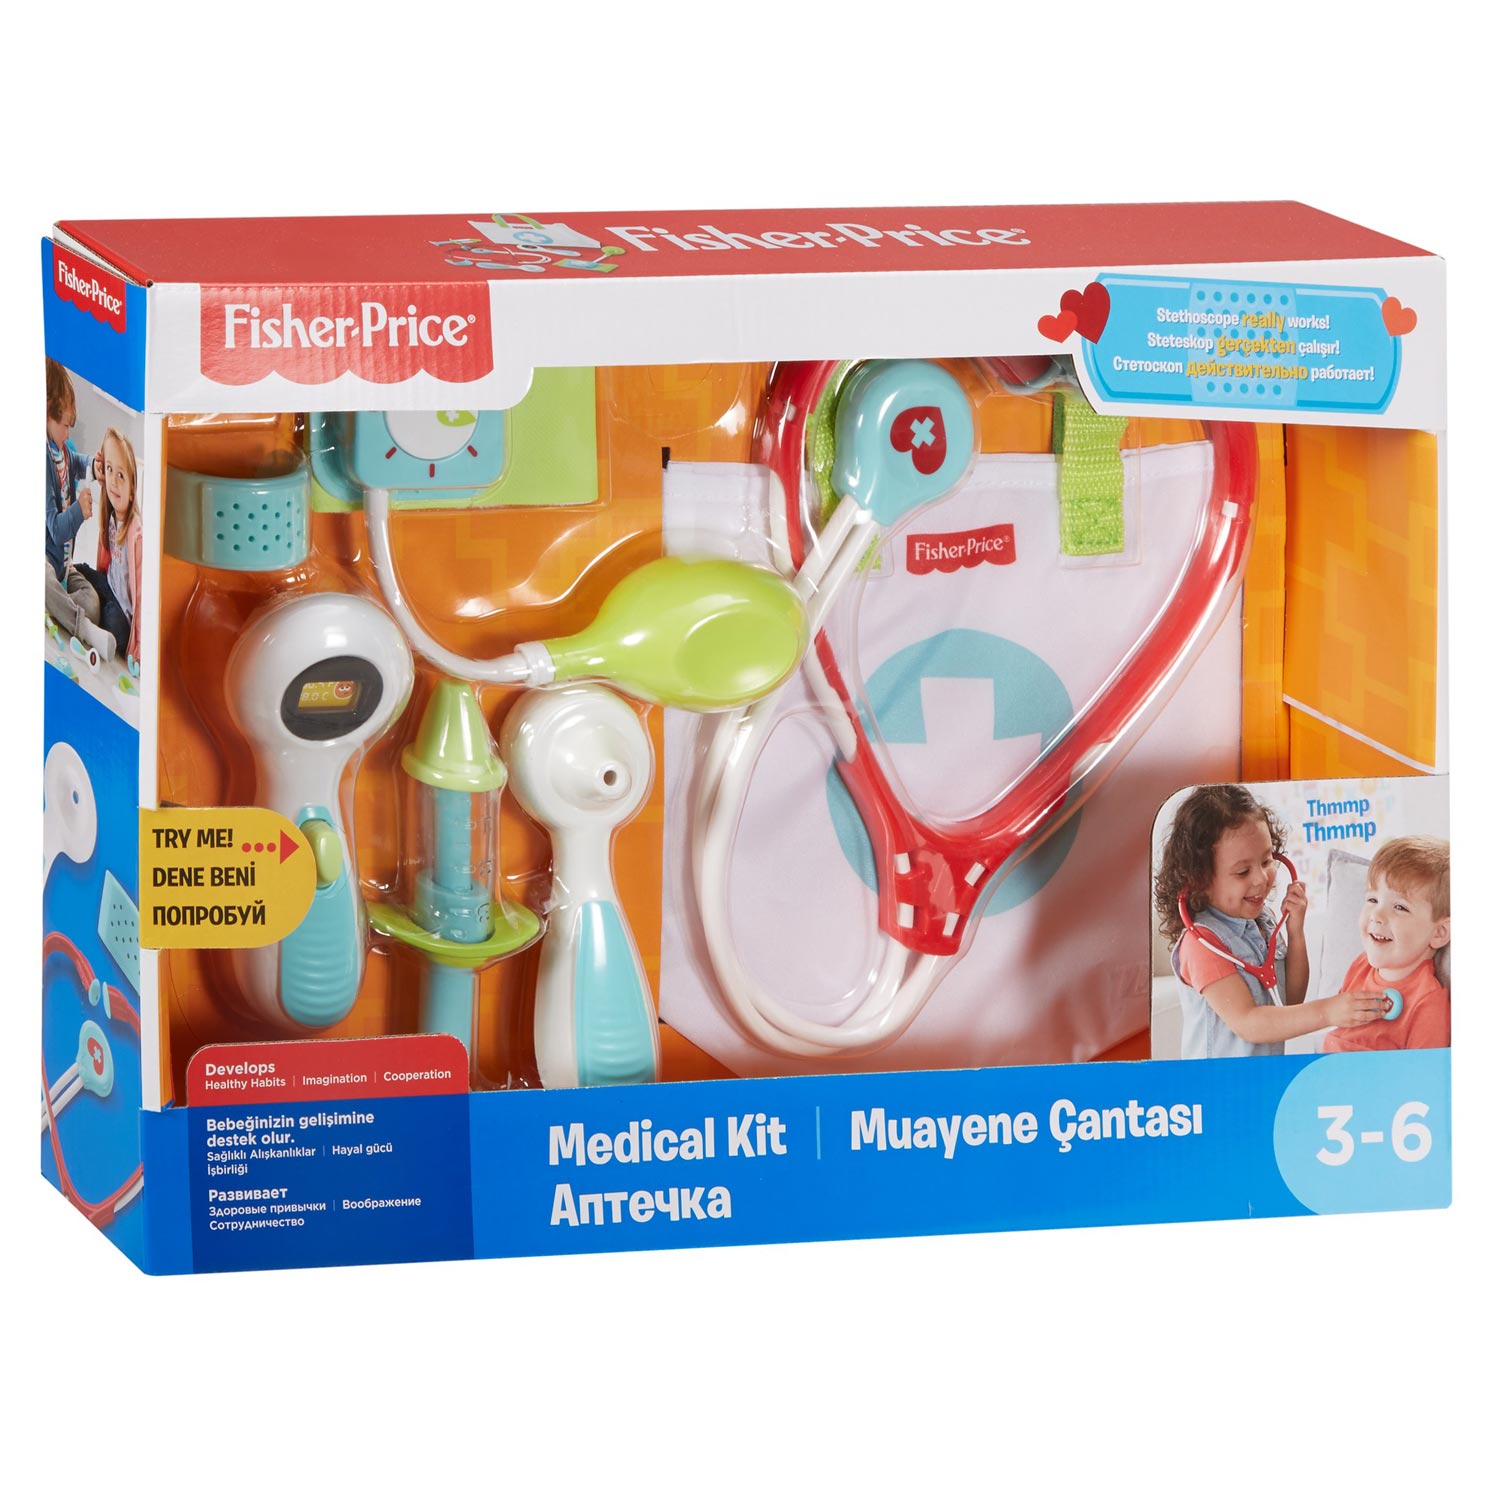 FISHER PRICE DOKTERSSET - 4 10 20 30 40 50 60 70 80 90 100 110 120 130 140 150 160 170 180 190 200 210 220 230 240 250 260 270 280 290 300 310 320 330 337